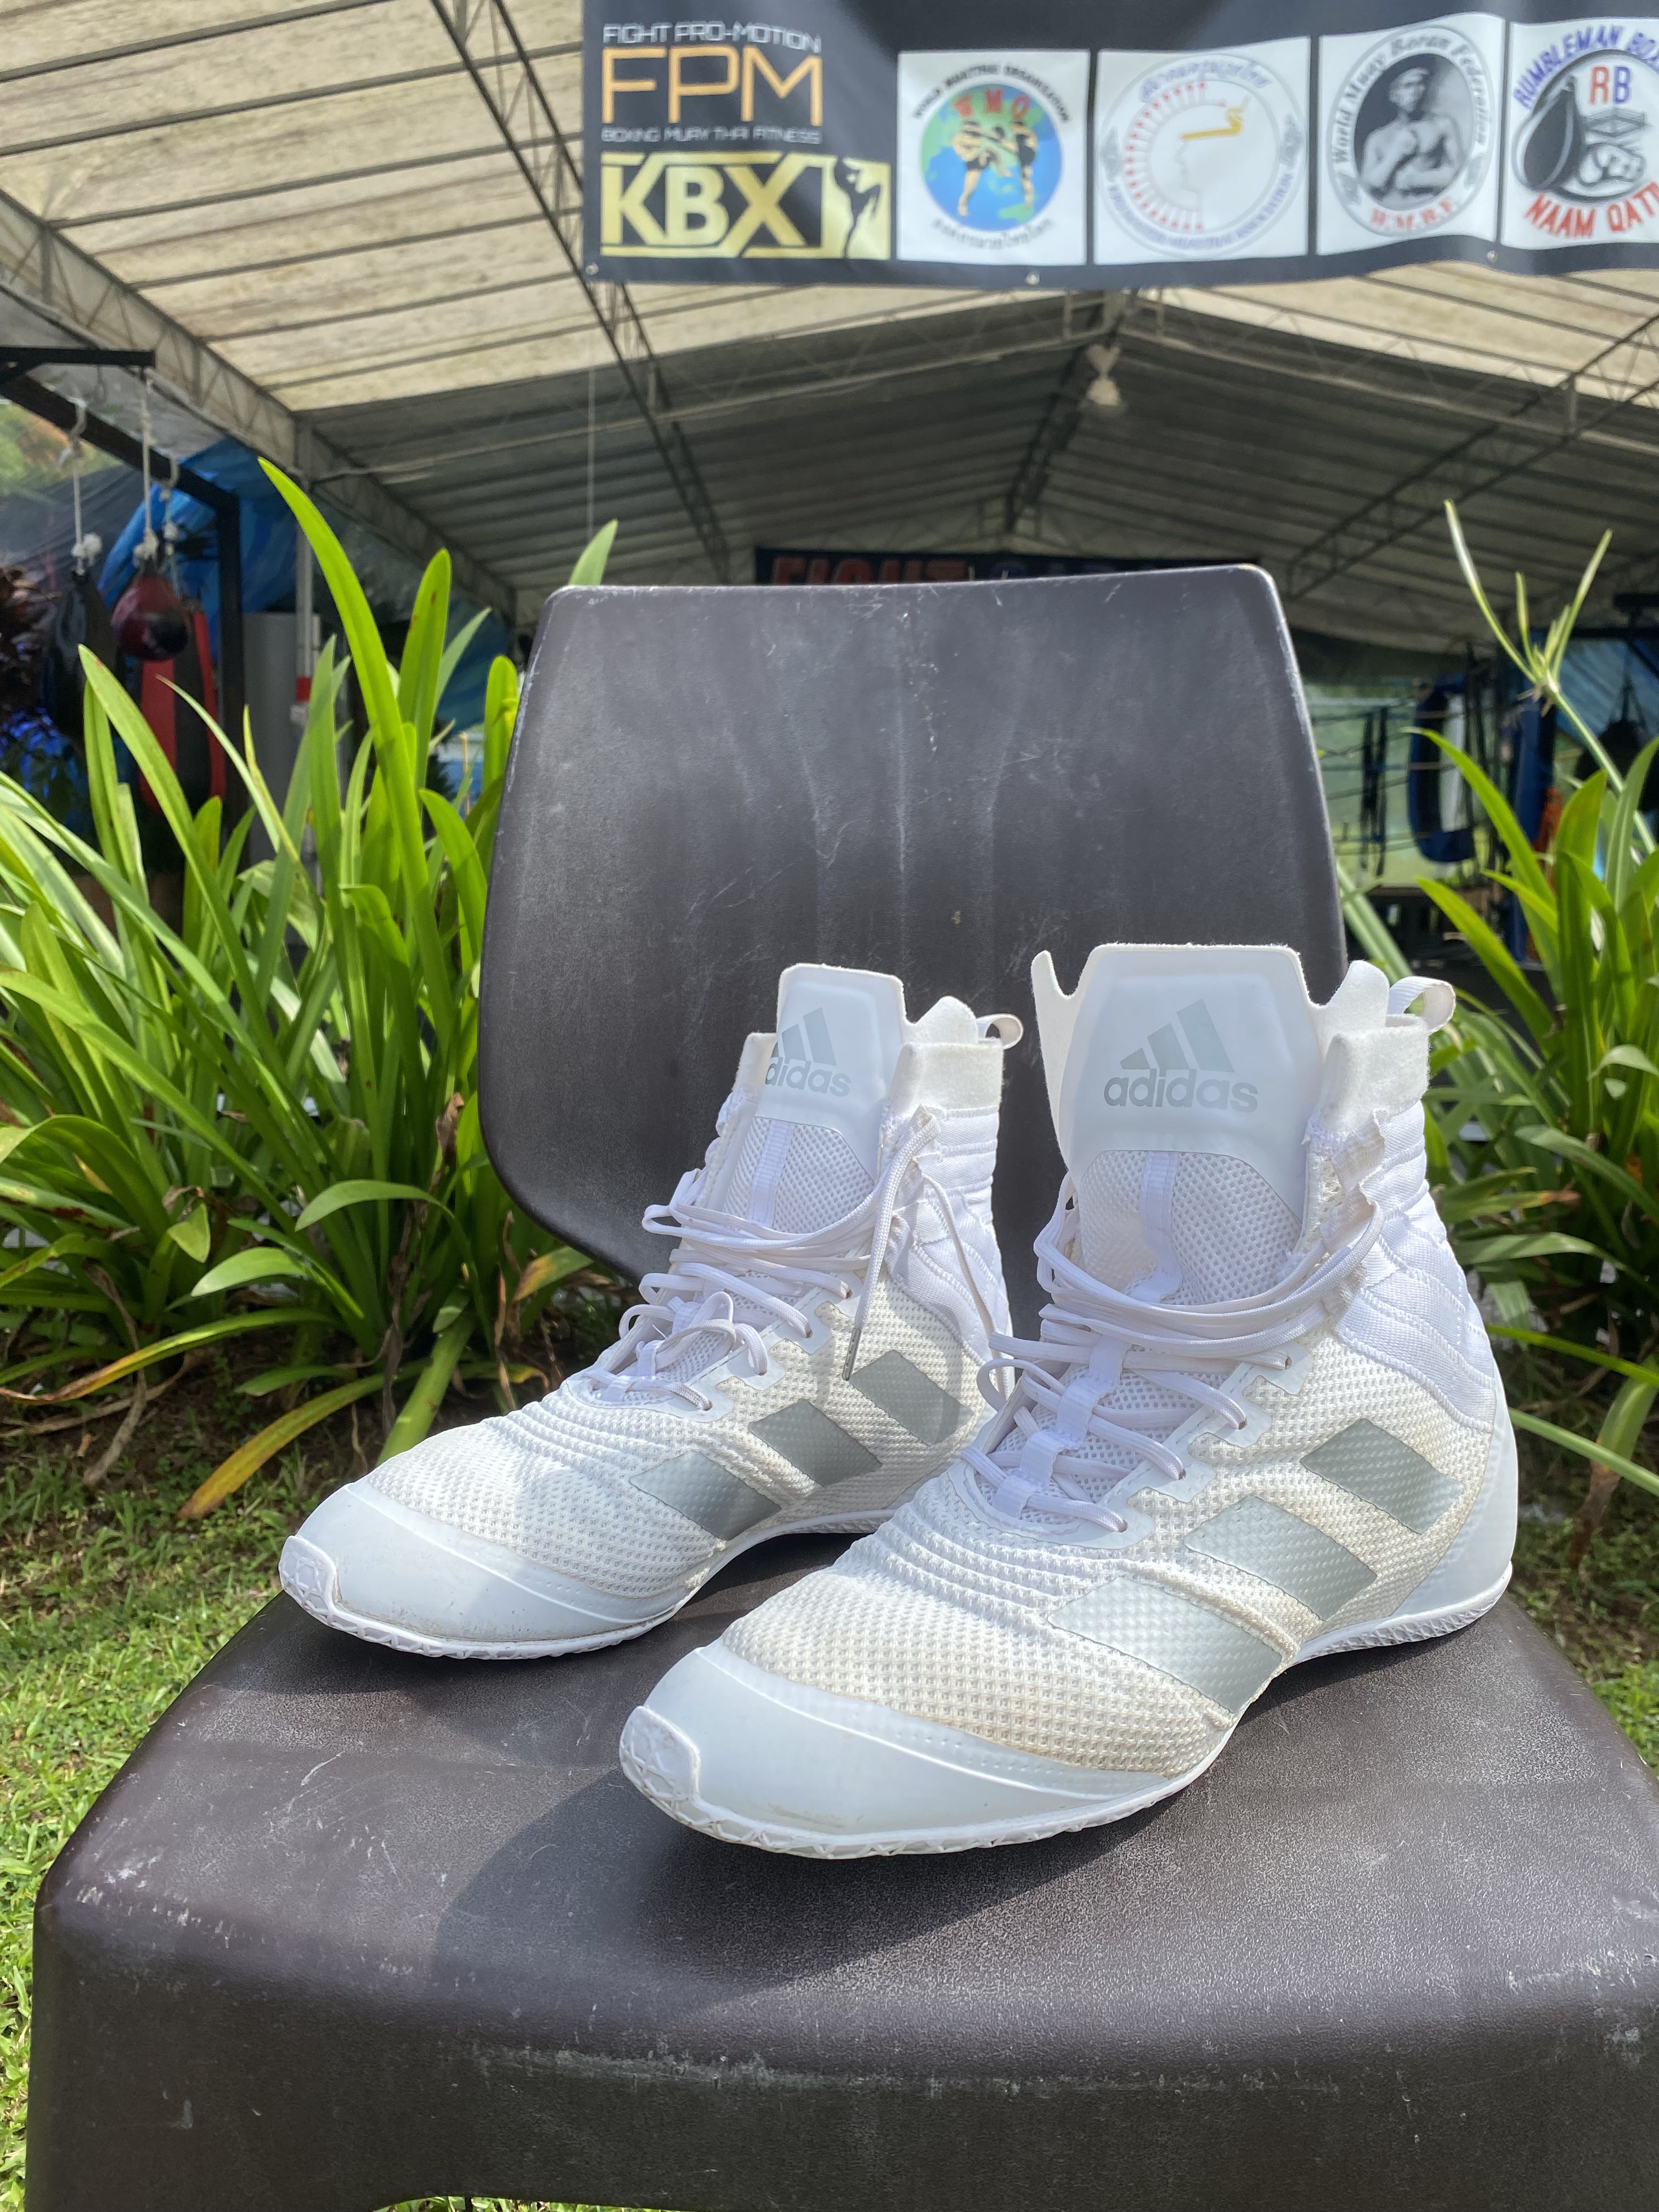 Adidas SpeedEx 18 Boxing Shoes WHITE/SILVER, Men's Fashion, Footwear, Boots  on Carousell